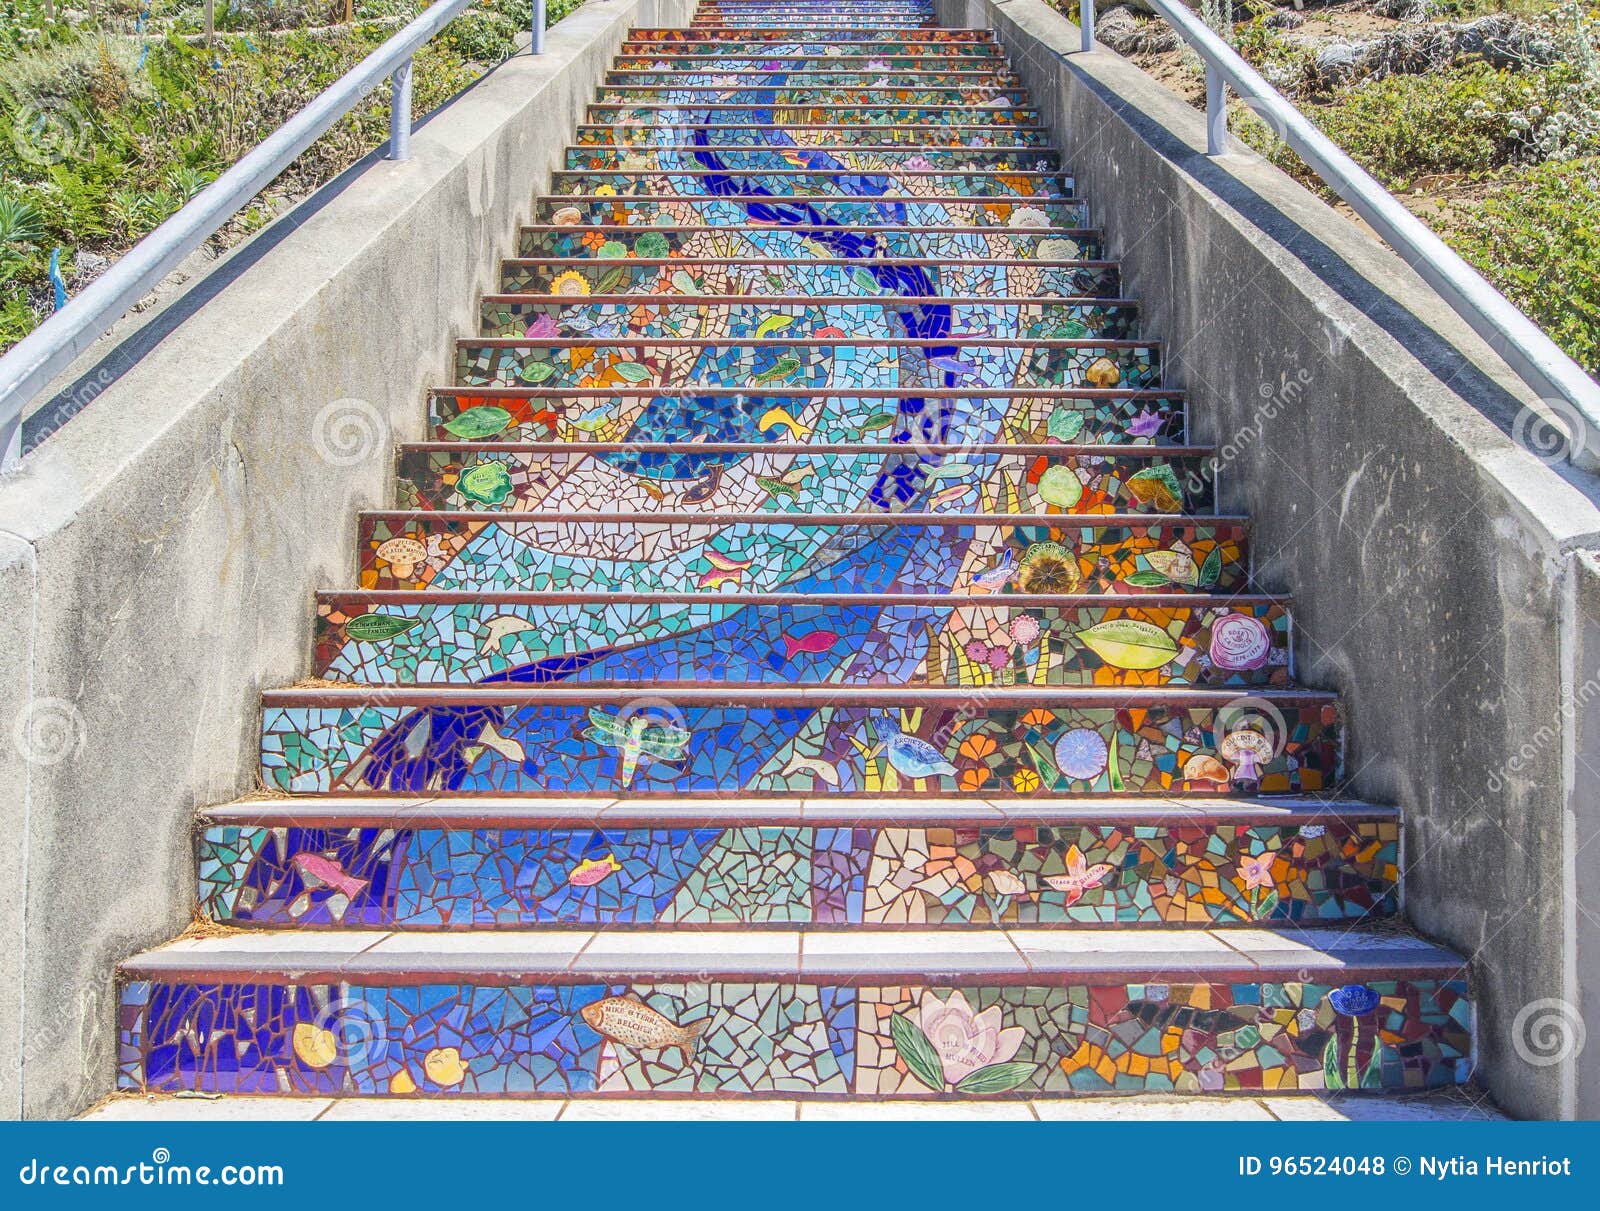 golden gate heights mosaic stairway, tiled steps